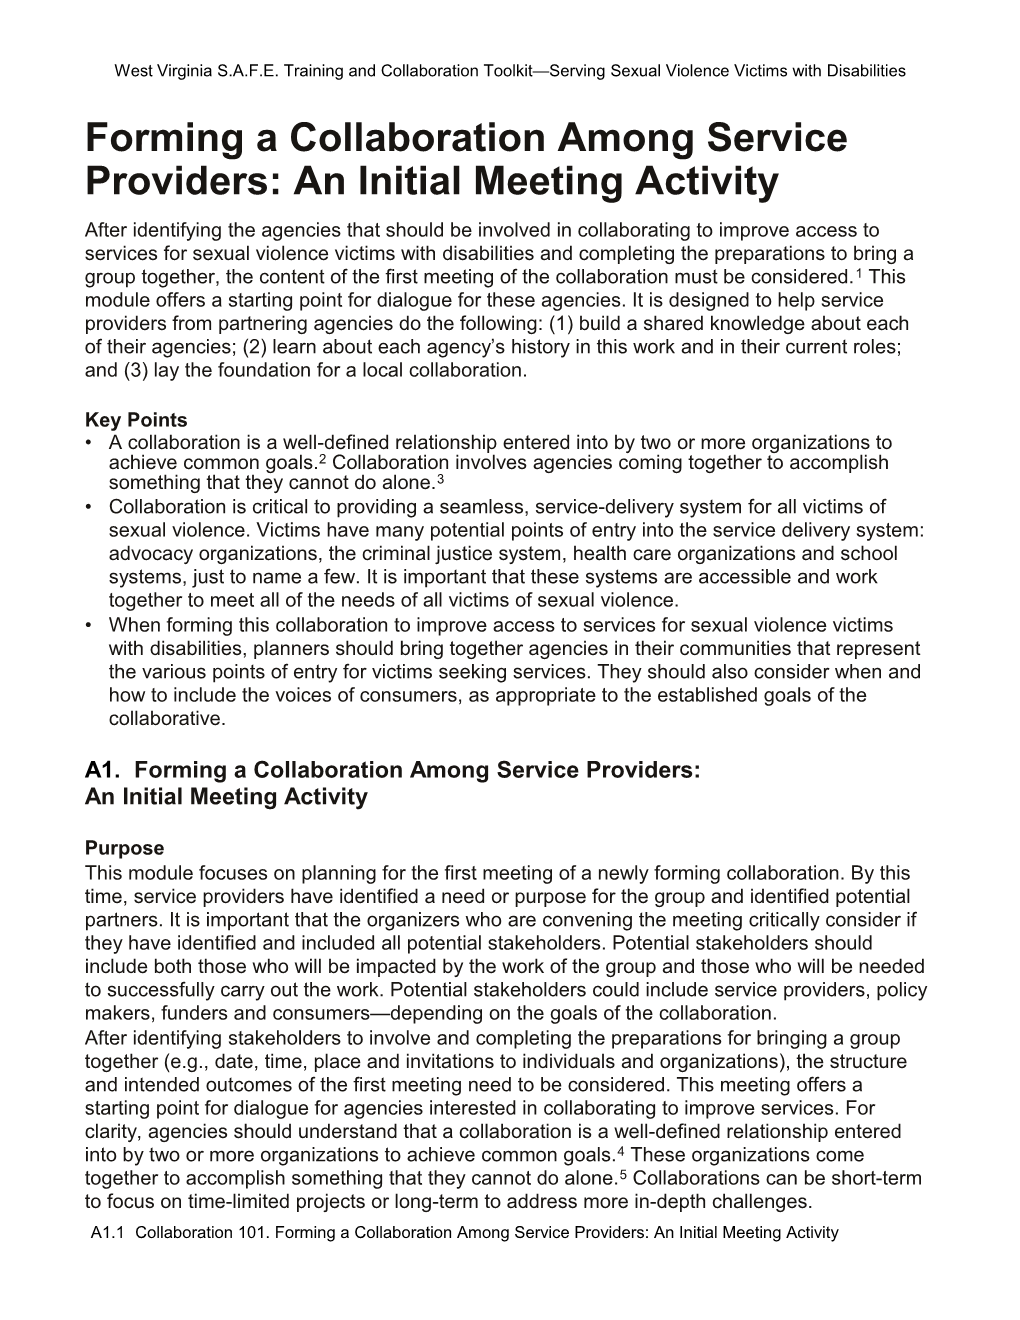 Forming a Collaboration Among Service Providers: an Initial Meeting Activity